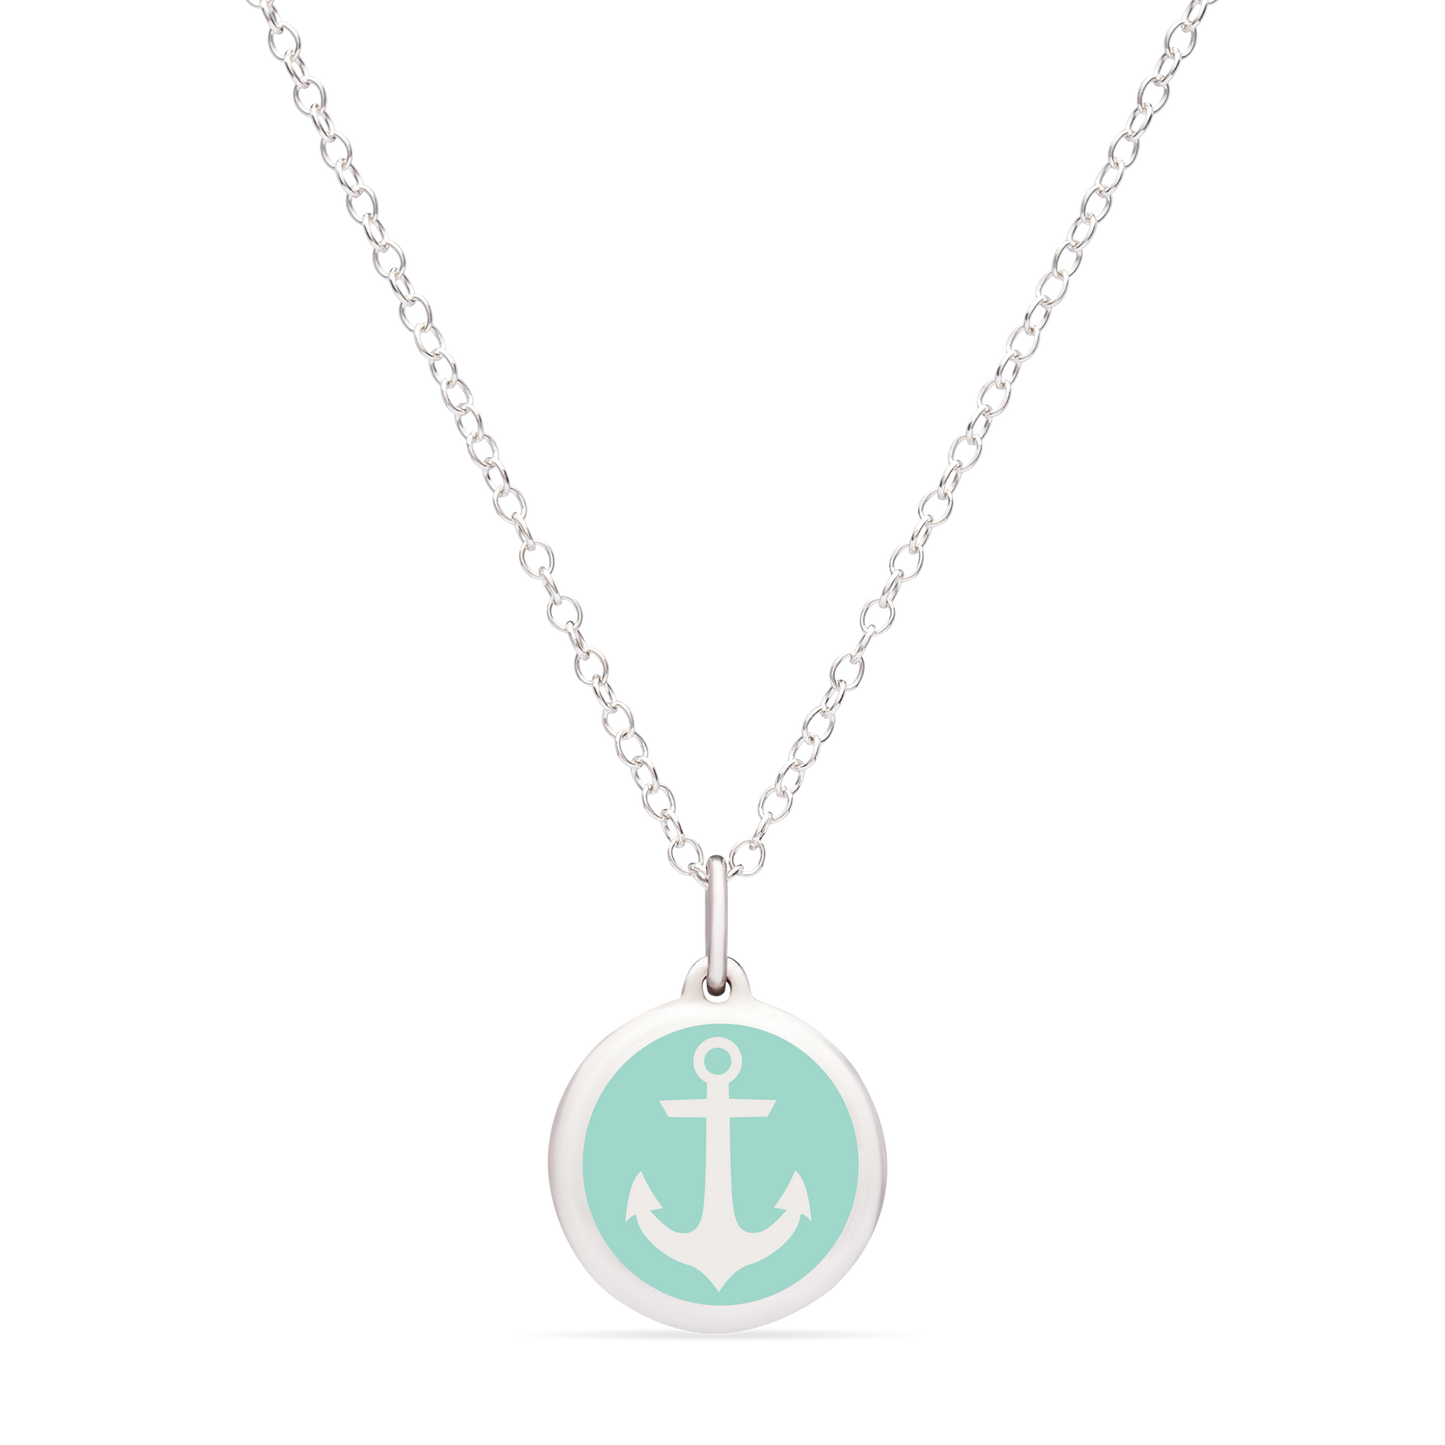 MINI ANCHOR CHARM sterling silver with rhodium plate